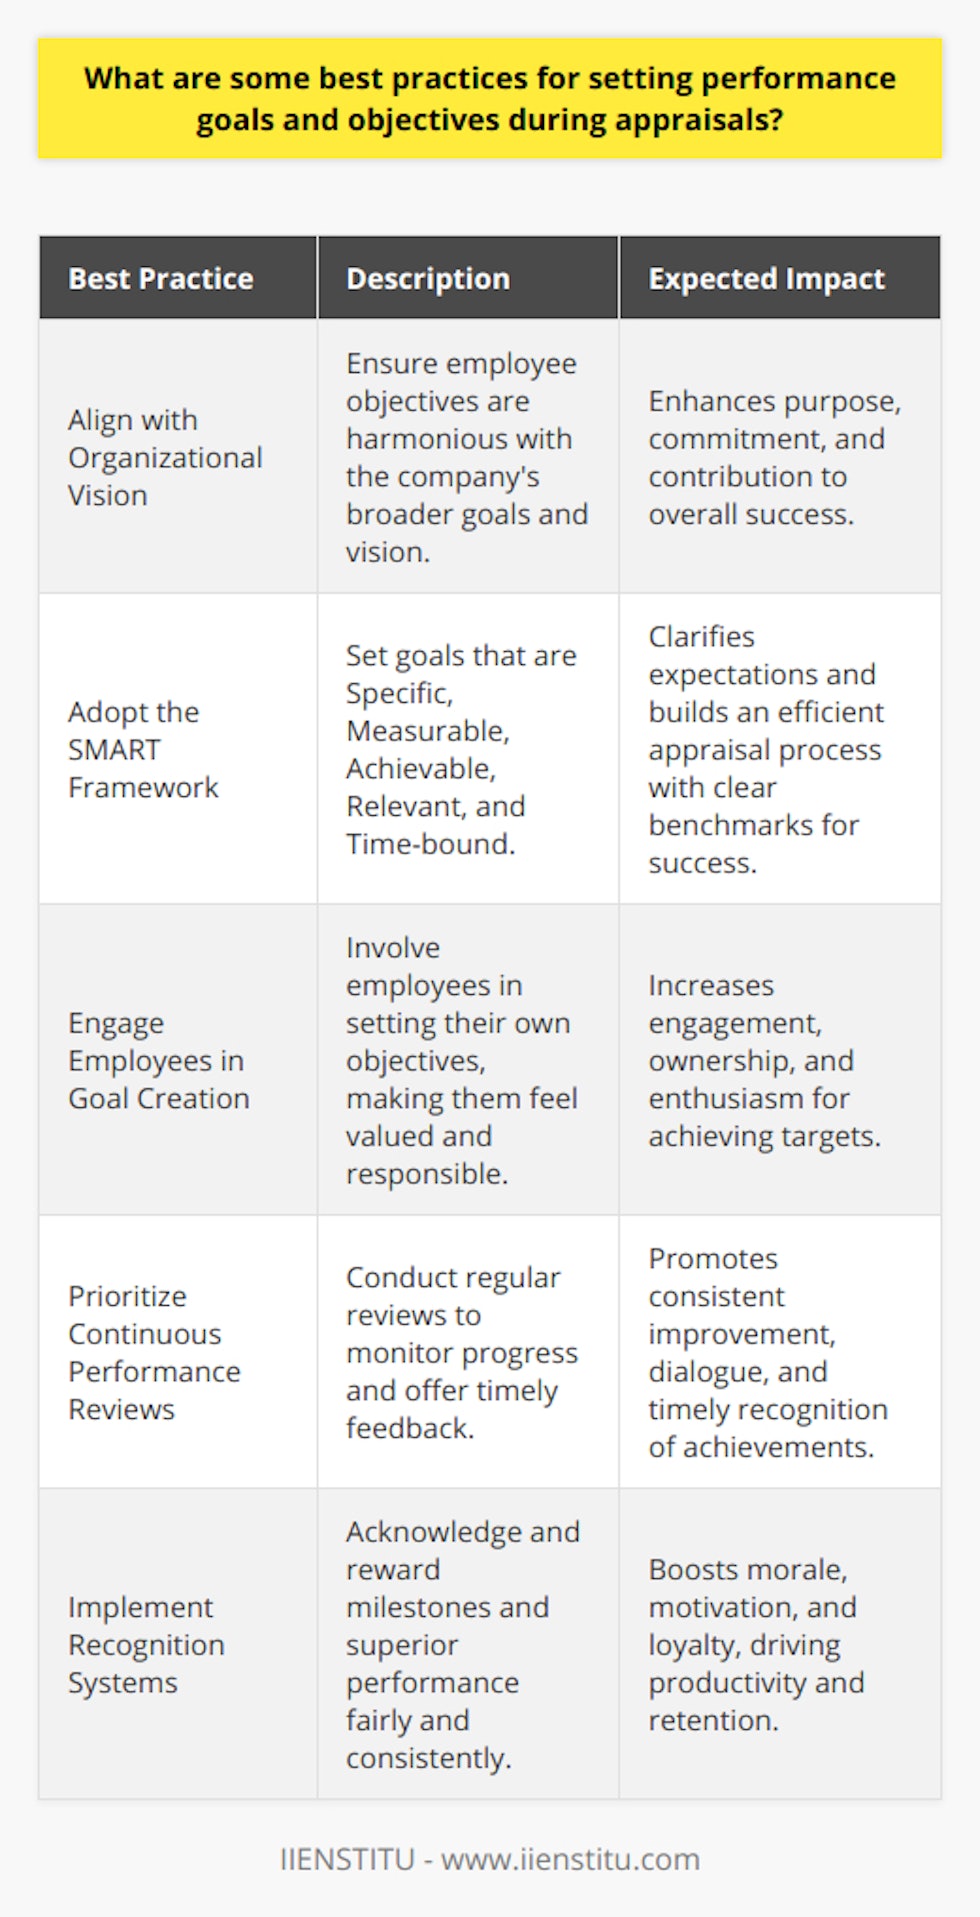 Effective Performance Goal Setting in AppraisalsThe evaluation of employee performance through appraisals is a crucial aspect of human resource management. Appraisals provide a structured method to assess and enhance employee performance, as well as align their goals with that of the organization. Crafting thoughtful and strategic performance goals is fundamental to the appraisal process. Below are some best practices for setting such goals and objectives:Aligning with Organizational VisionThe first step in setting performance goals is to ensure they are in sync with the broader organizational vision and goals. Employees must see how their individual objectives contribute to the company’s success on a macro scale. This alignment inspires purpose and commitment to collective achievements.Adopting the SMART FrameworkEmploying the SMART criteria – where goals are Specific, Measurable, Achievable, Relevant, and Time-bound – facilitates the creation of effective and practical targets. This approach clarifies expectations, provides precise benchmarks for measurement, and establishes a timeline for goal completion, enhancing the overall efficiency of the appraisal process.Engaging Employees in Goal CreationThe inclusion of employees in the goal-setting process can greatly impact their engagement and performance. When employees are allowed input into their goals and objectives, they feel valued and are more likely to take ownership of their roles, resulting in improved commitment and enthusiasm towards fulfilling their targets.Prioritizing Continuous Performance ReviewsRegularly scheduled reviews can reinforce progress and provide opportunities for course correction when necessary. Continuous feedback helps maintain an ongoing dialogue between supervisors and employees, fostering an environment where guidance is readily available, and achievements are promptly acknowledged.Implementing Recognition SystemsCreate a culture of appreciation by acknowledging employee milestones and exceptional performance. Establish a clear, fair, and consistent system of recognition and rewards that motivates employees to strive towards and exceed their established goals. This practice not only enhances morale but also drives productivity and a sense of loyalty to the organization.By integrating these practices into appraisal systems, companies can expect to see a marked improvement in their employees’ performance and engagement levels. These best practices contribute to a robust foundation for not only individual growth and satisfaction but also the long-term success of the organization.